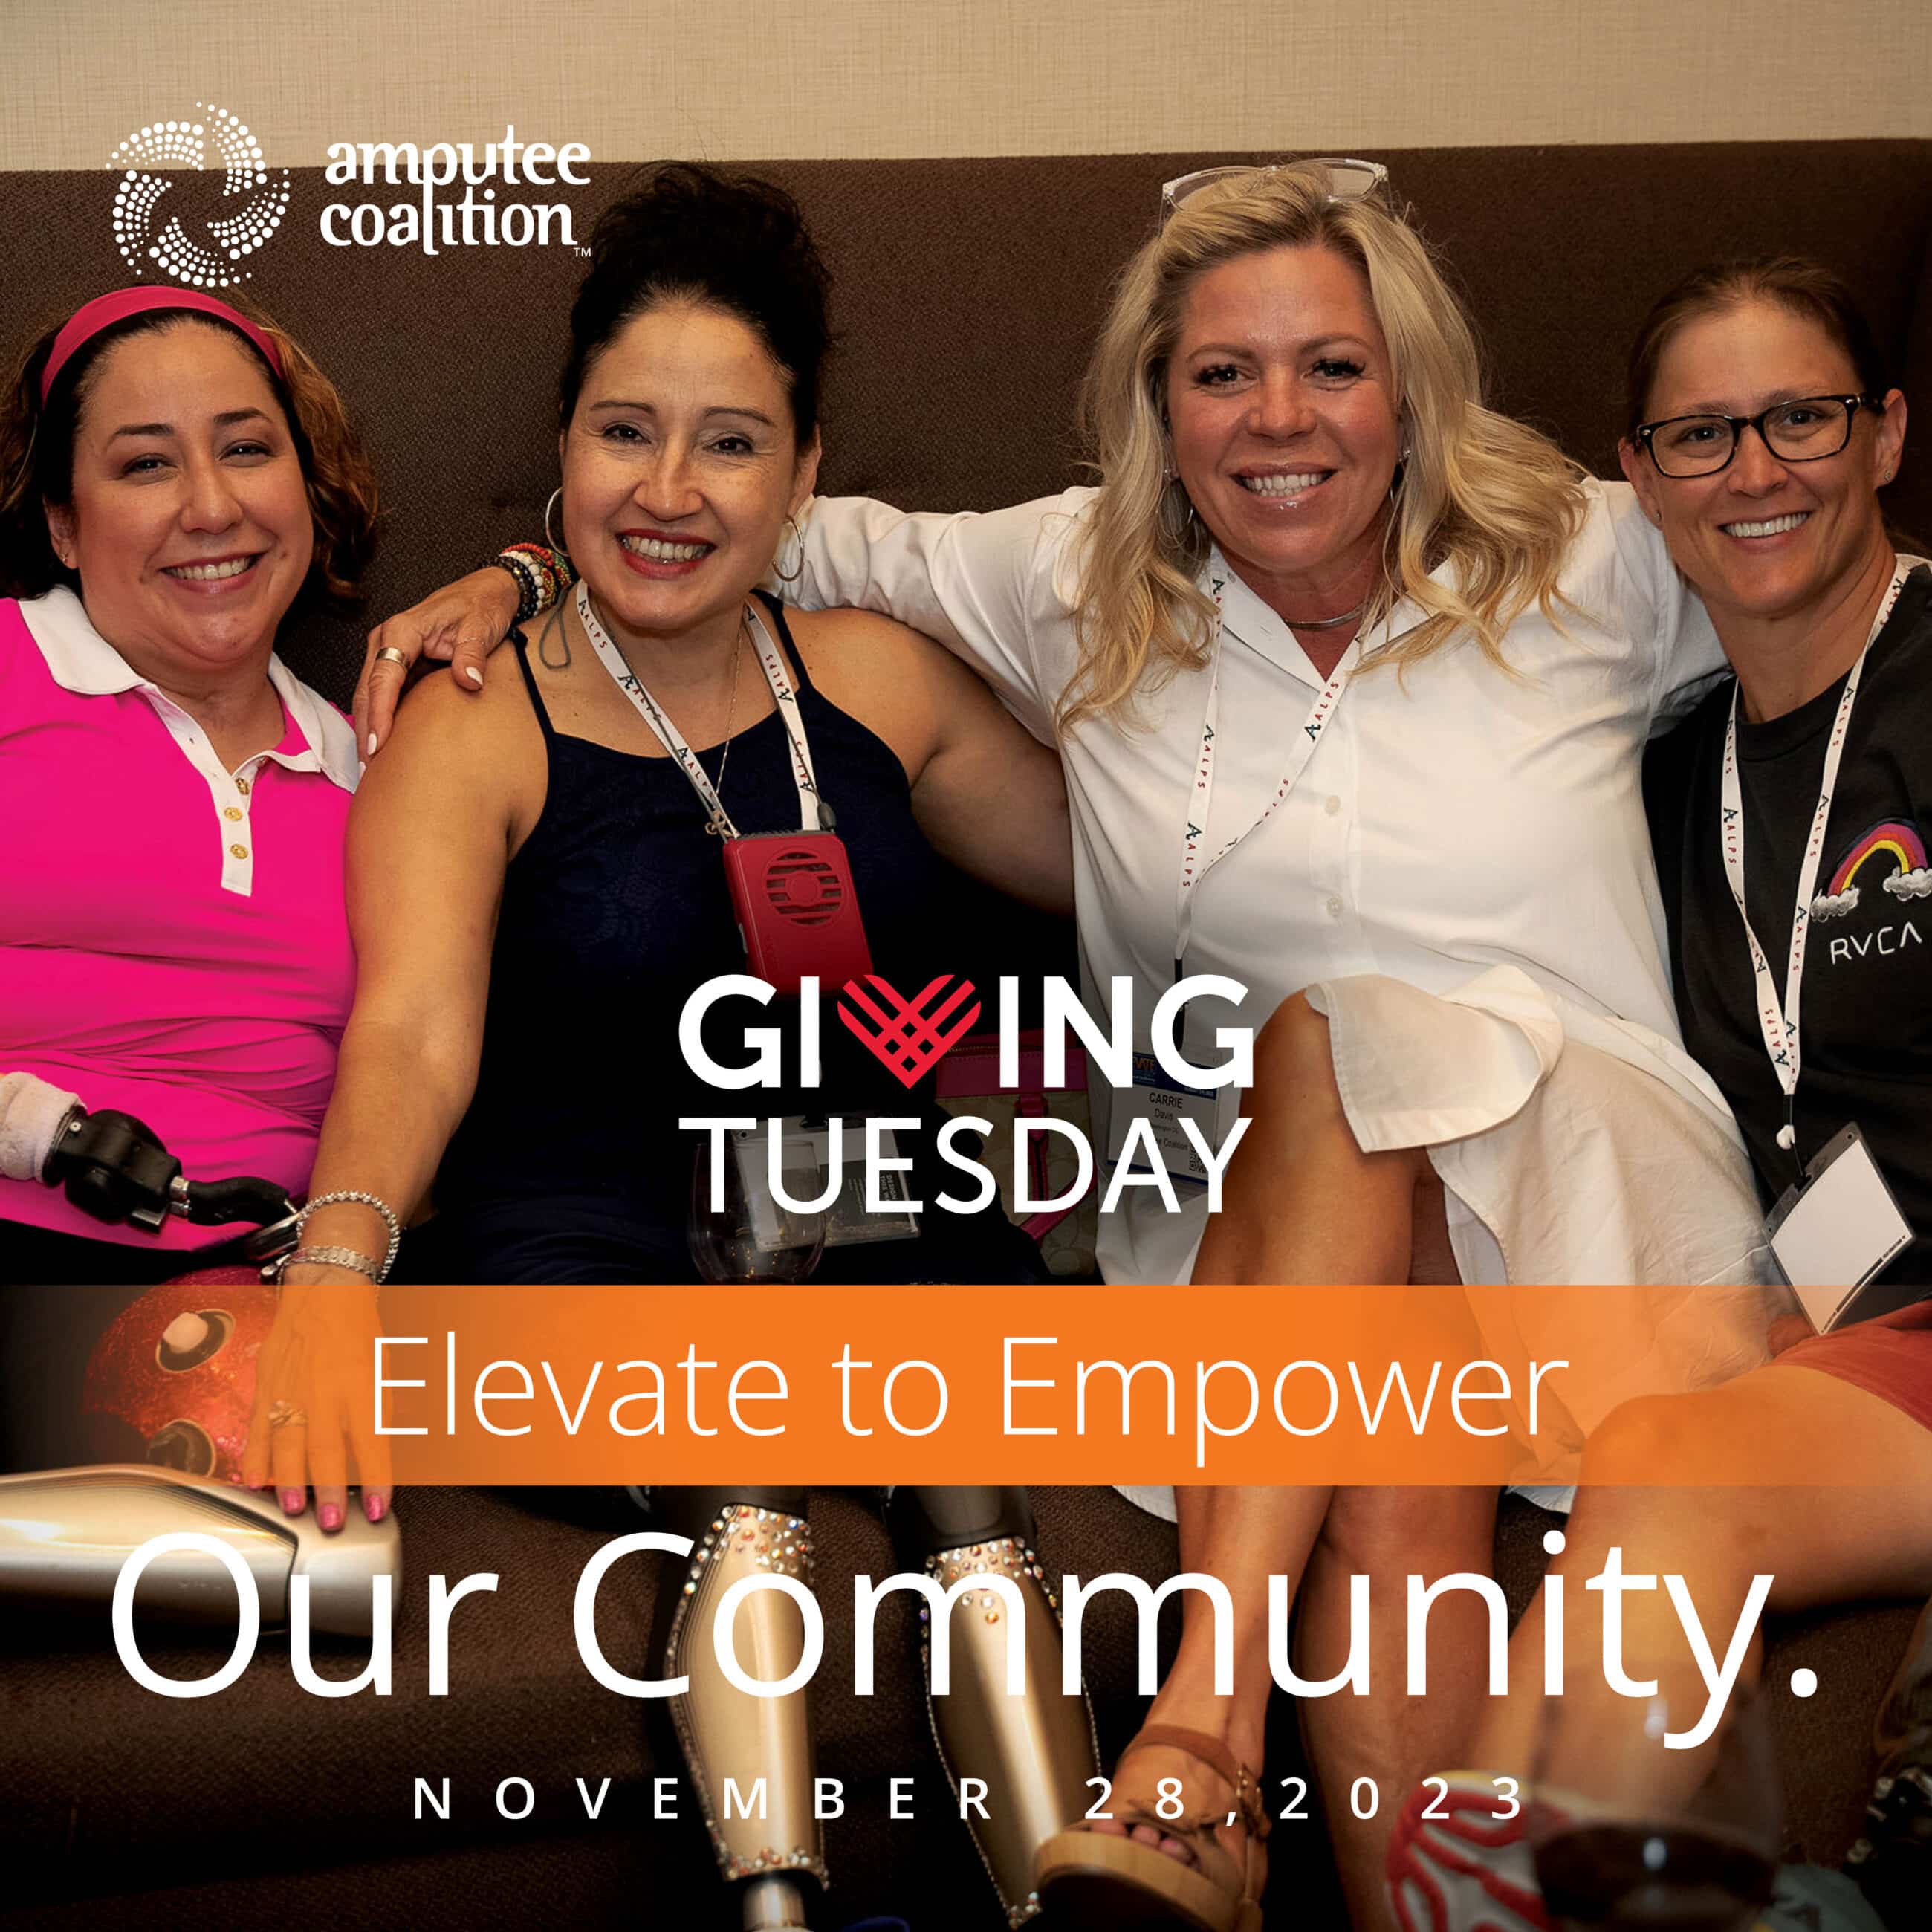 Giving Tuesday - Elevate to Empower Our Community